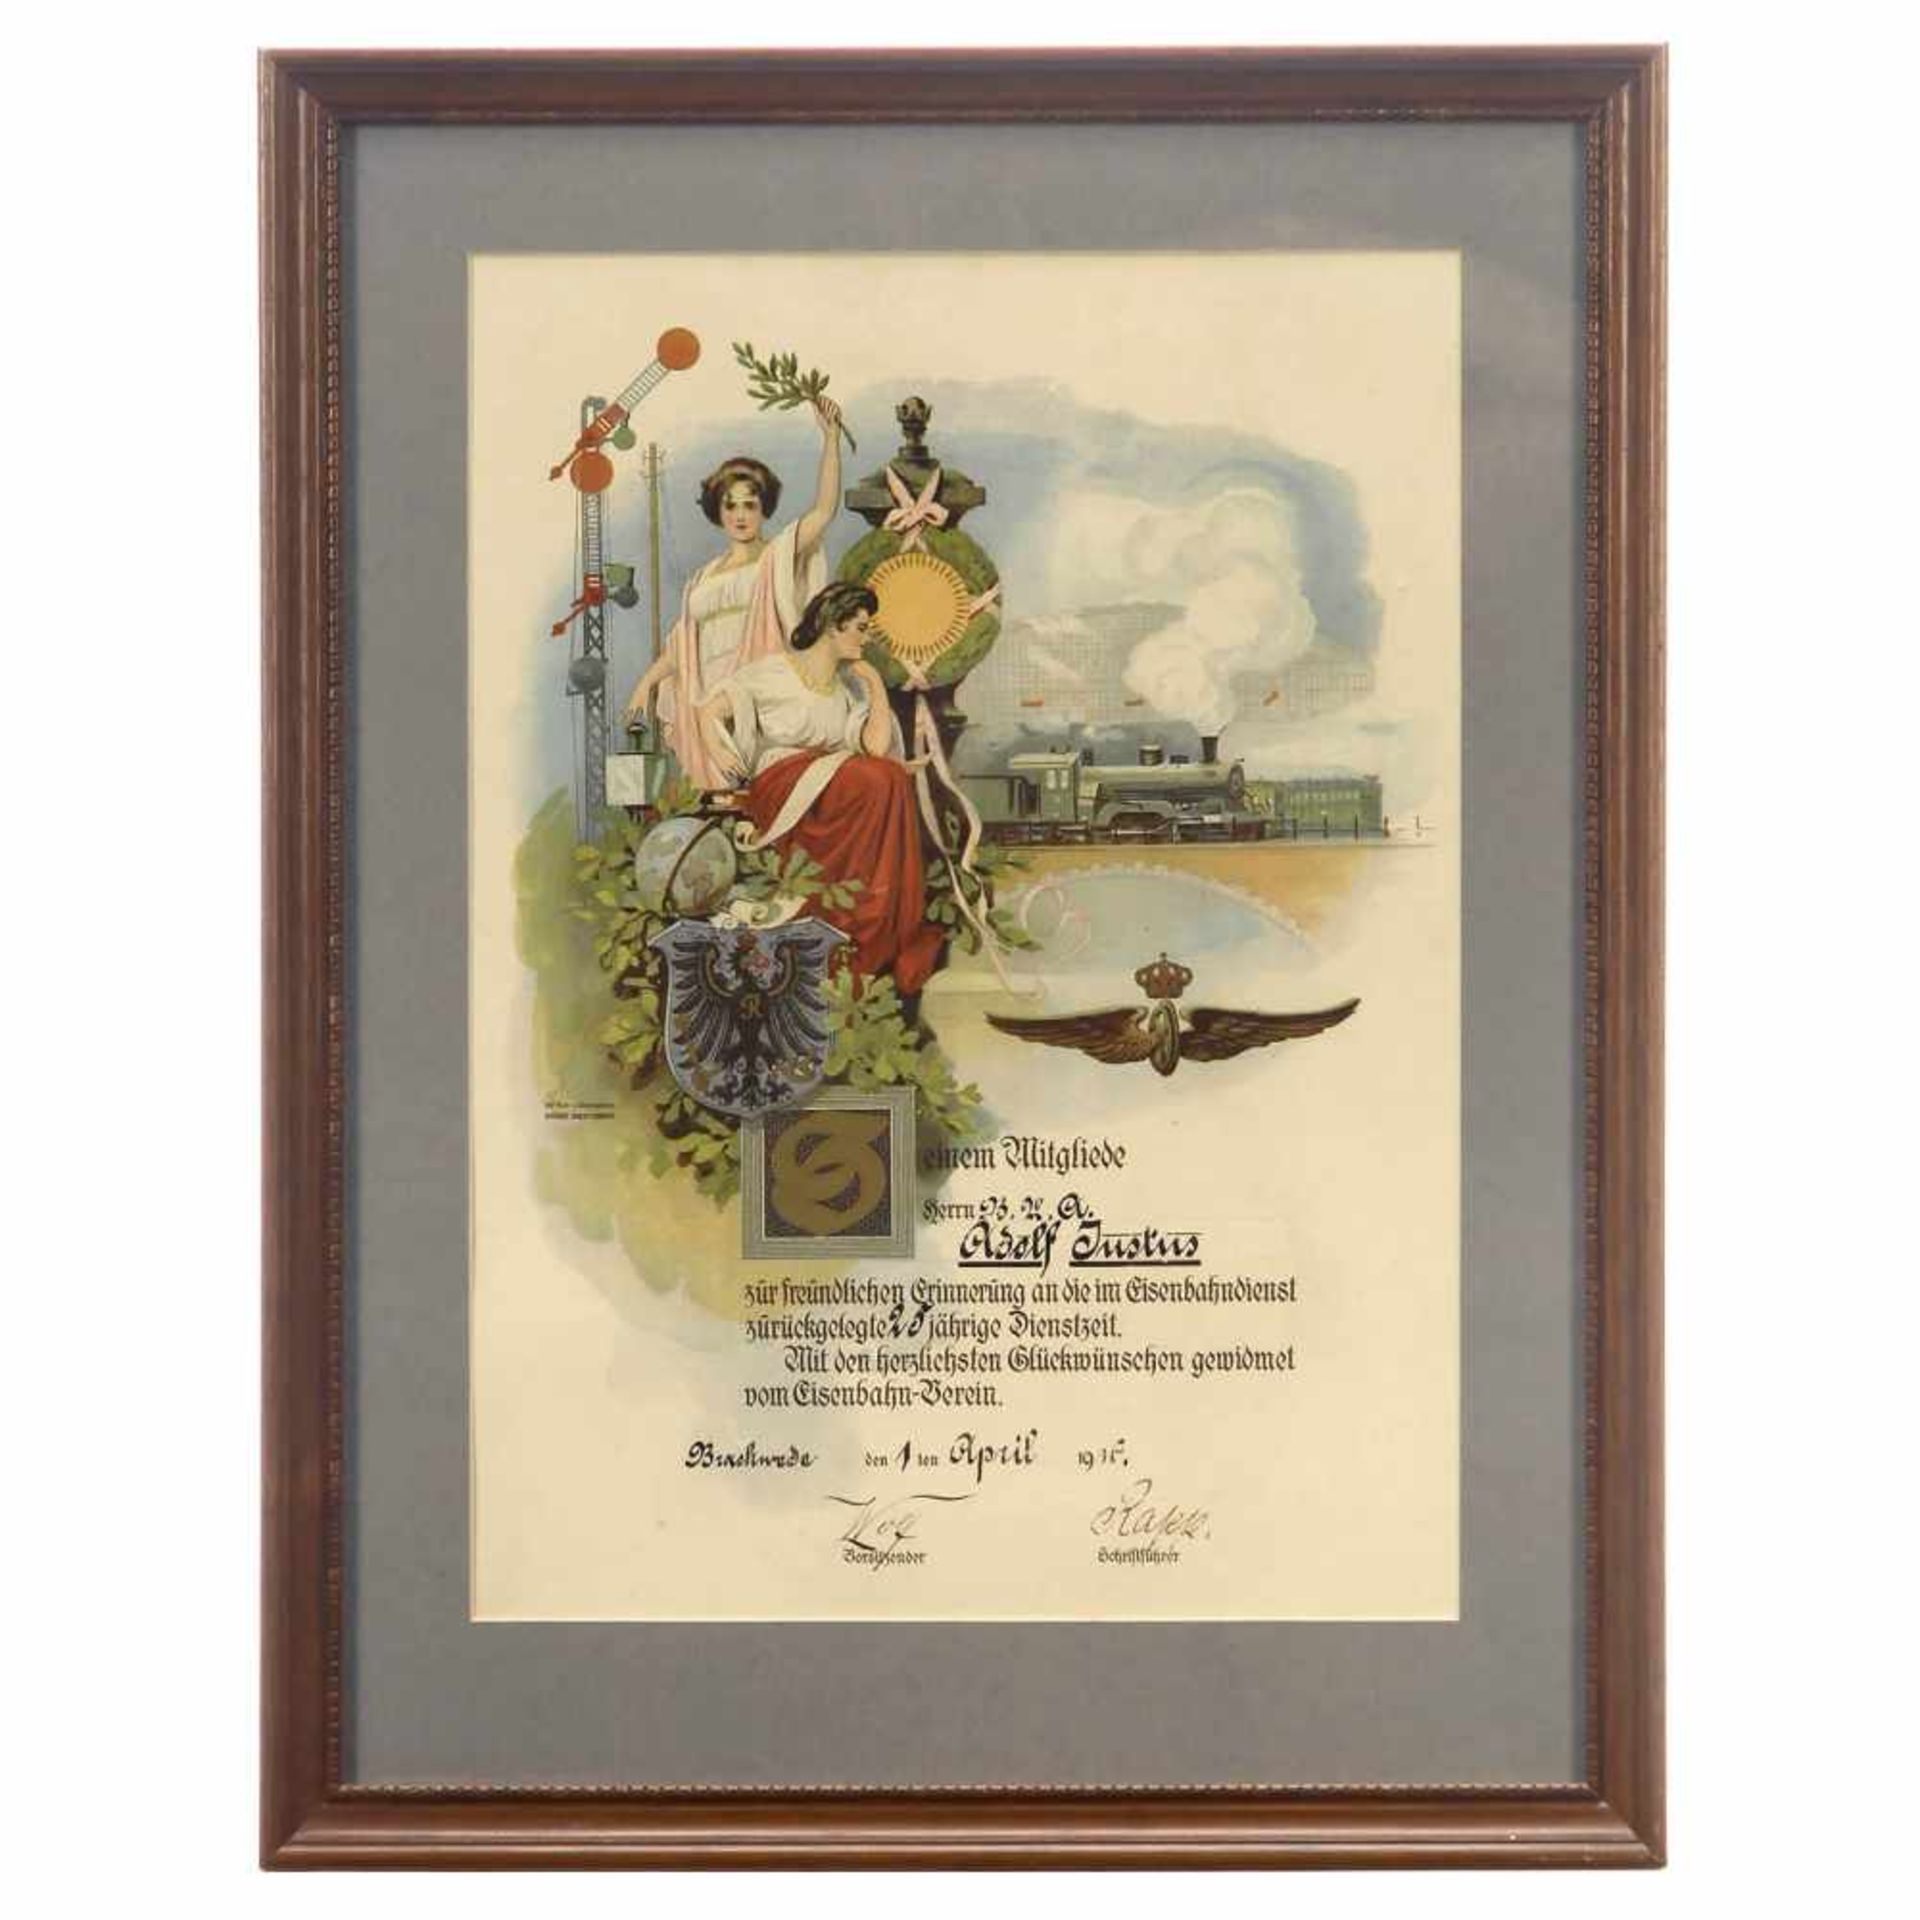 Framed Railwayman Certificate, 1916In memory of 25 years of work, lithograph, size 12 ¼ x 17 in.,